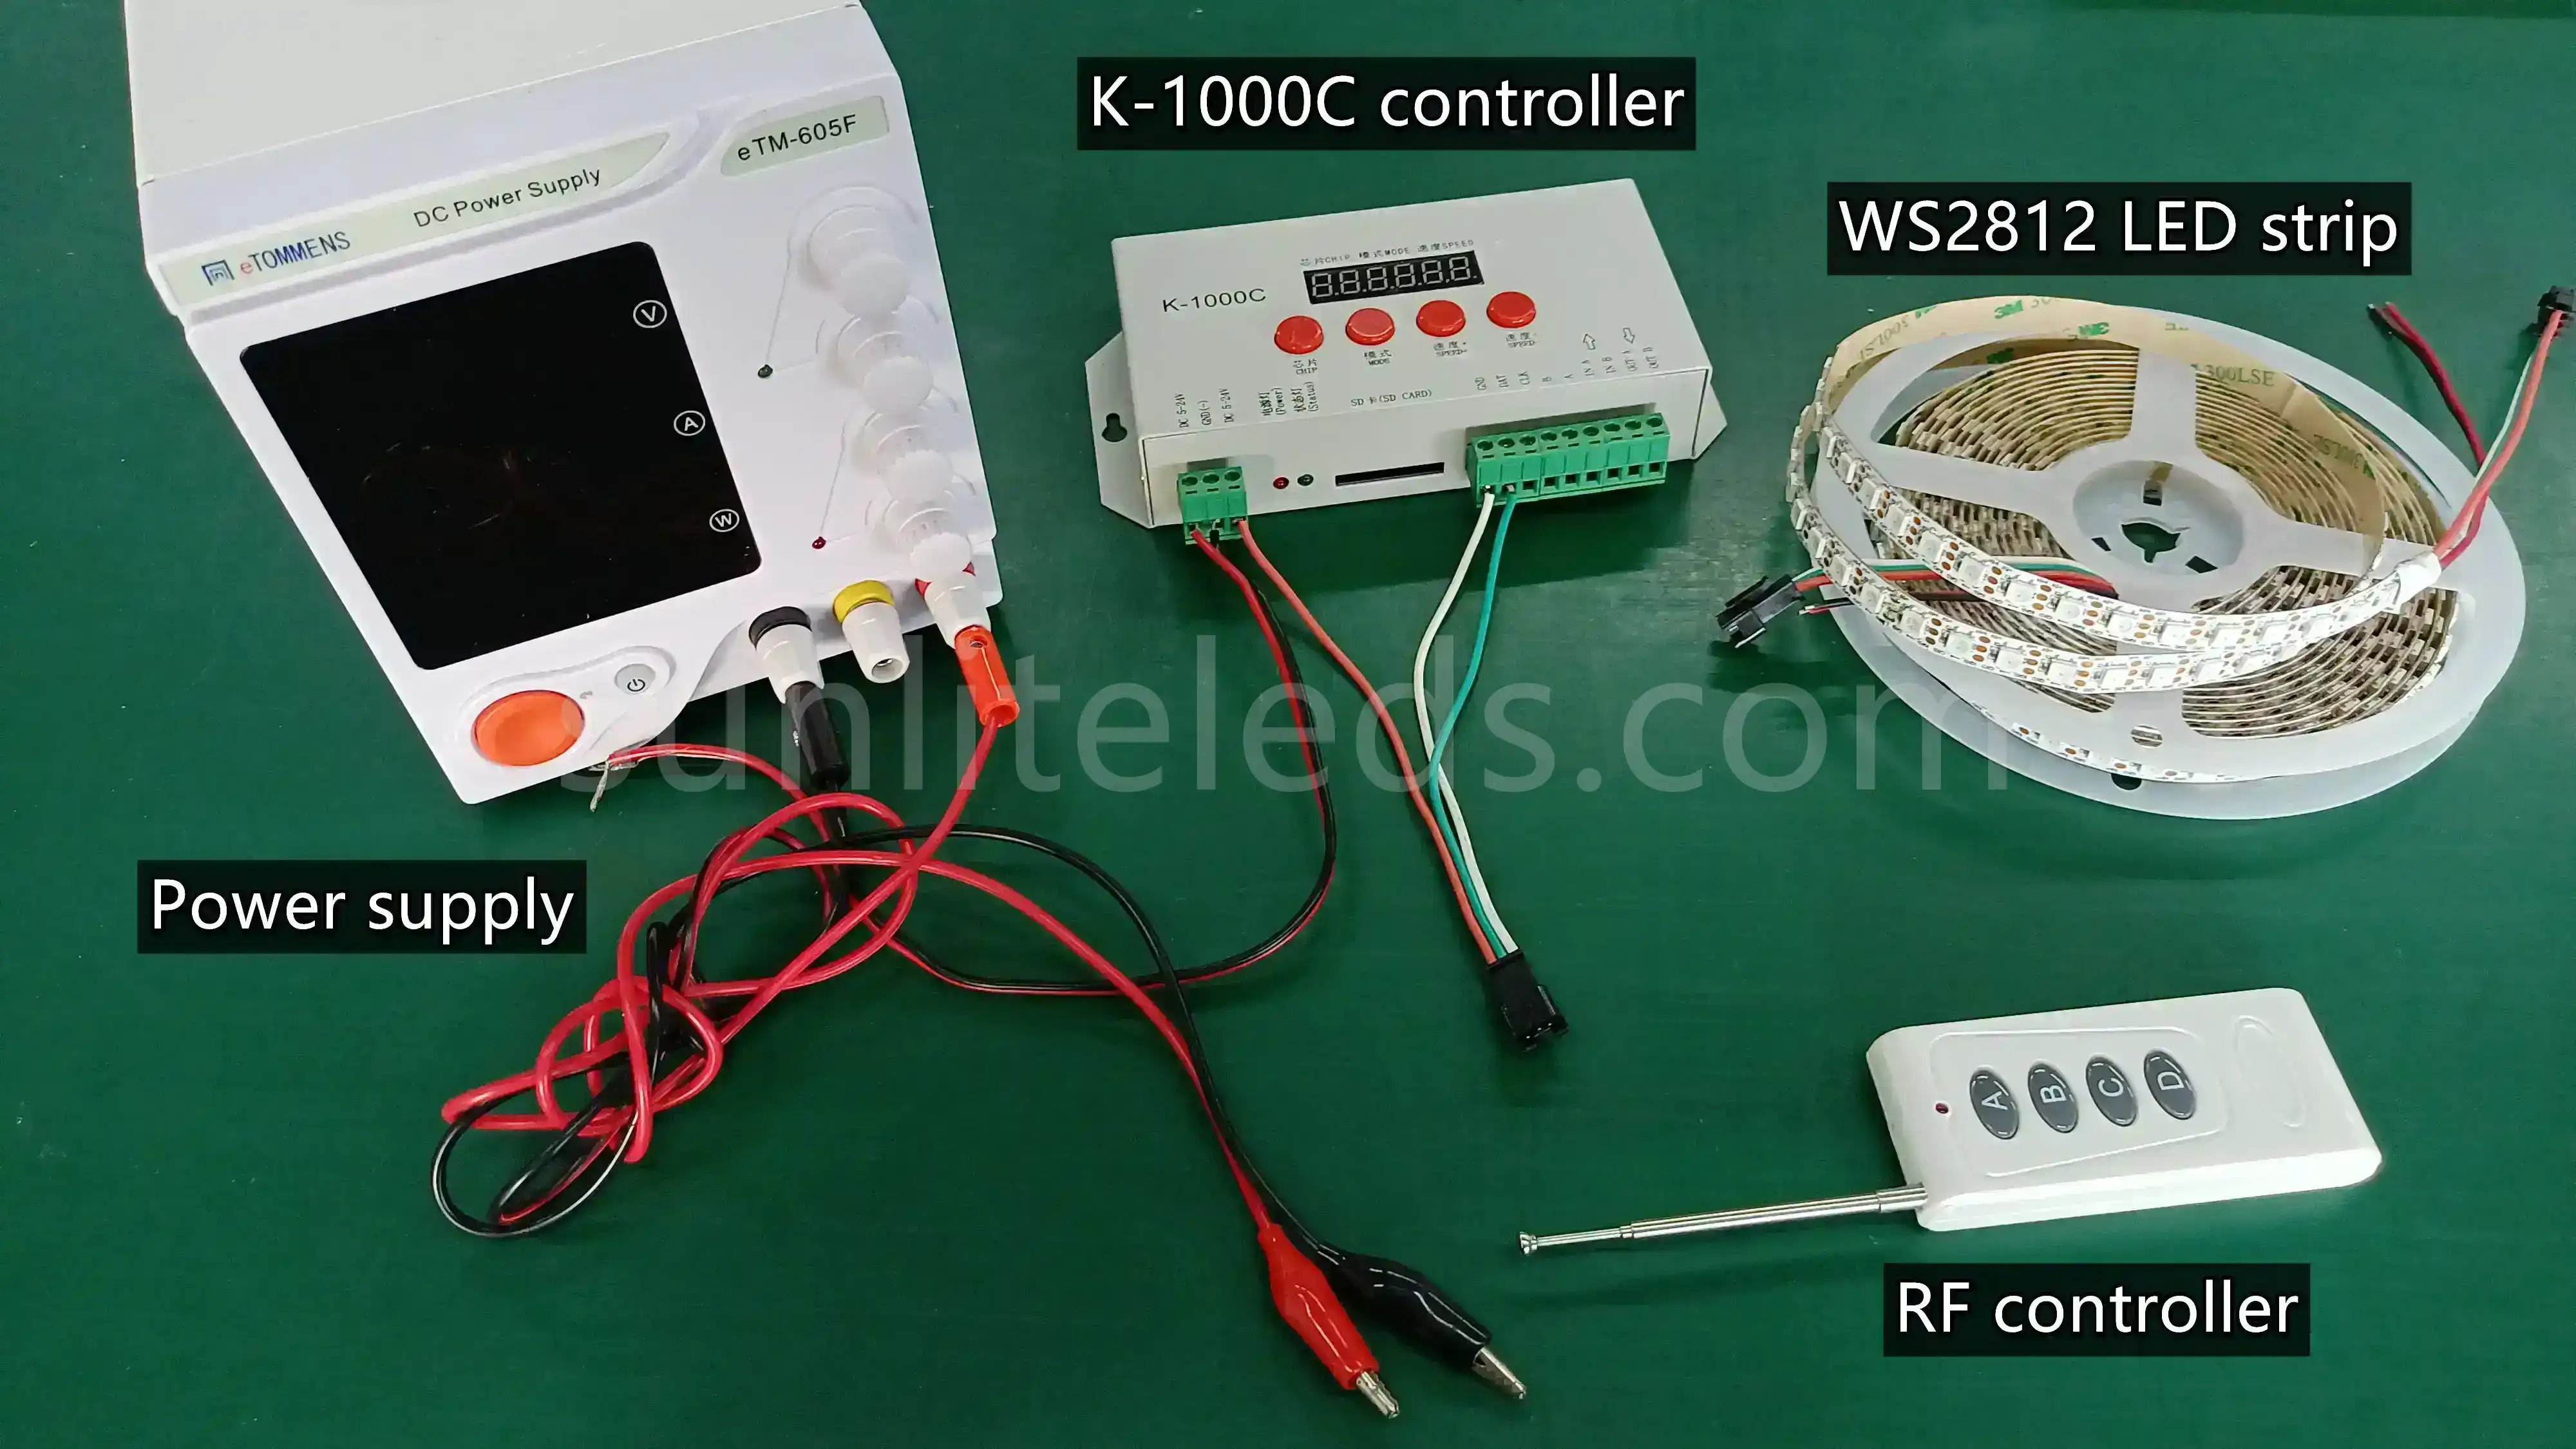 WS2812 LED strip connection devices